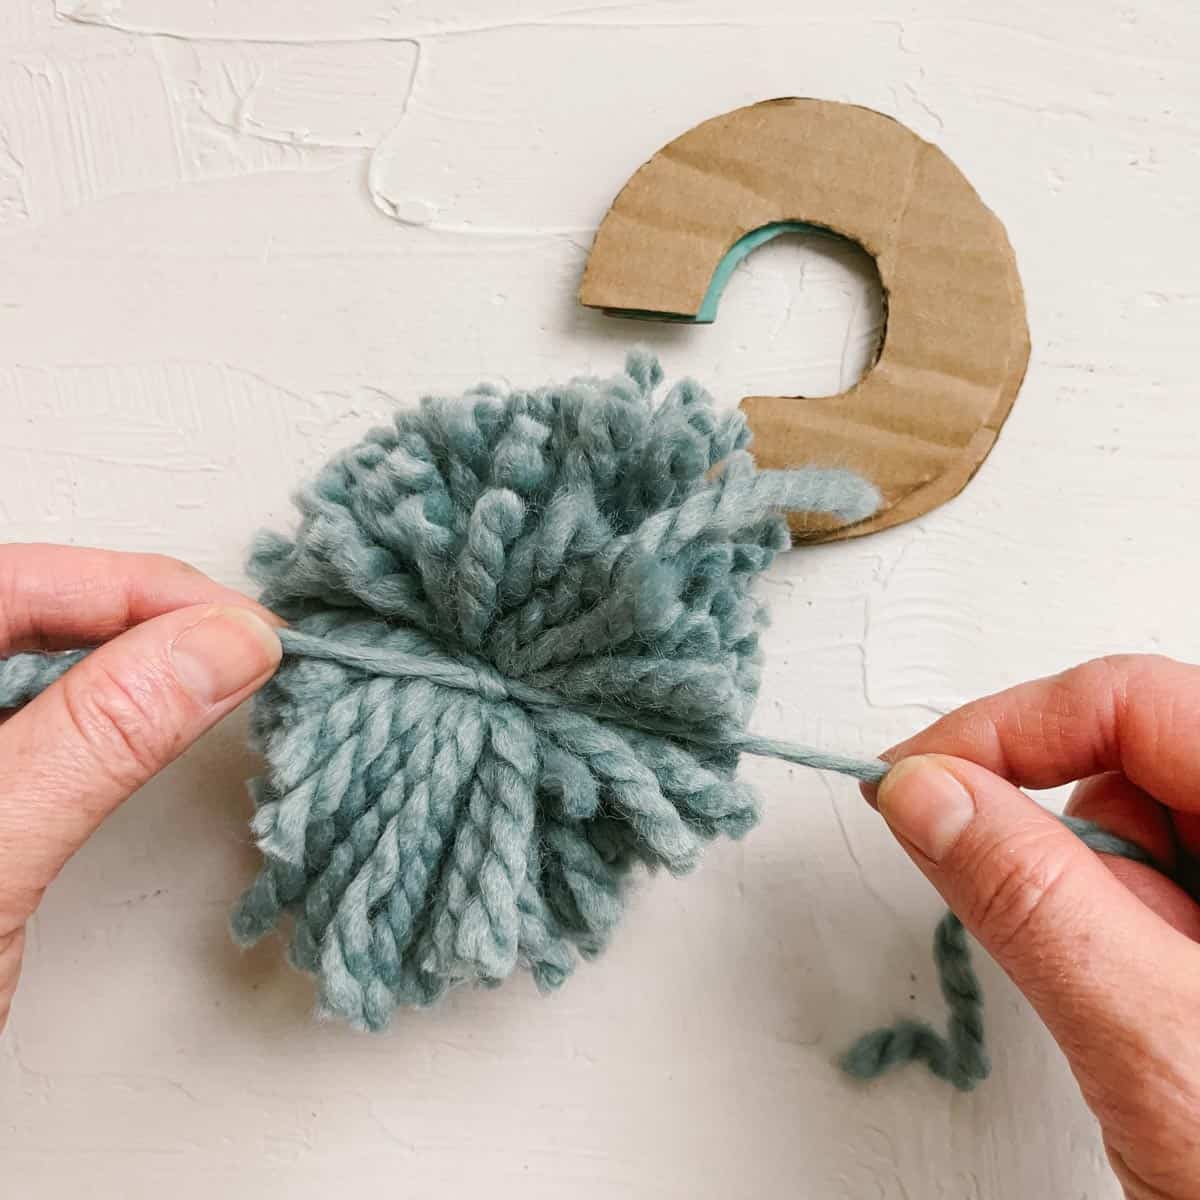 Tying off the strands of yarn in a handmade pom pom to secure them.